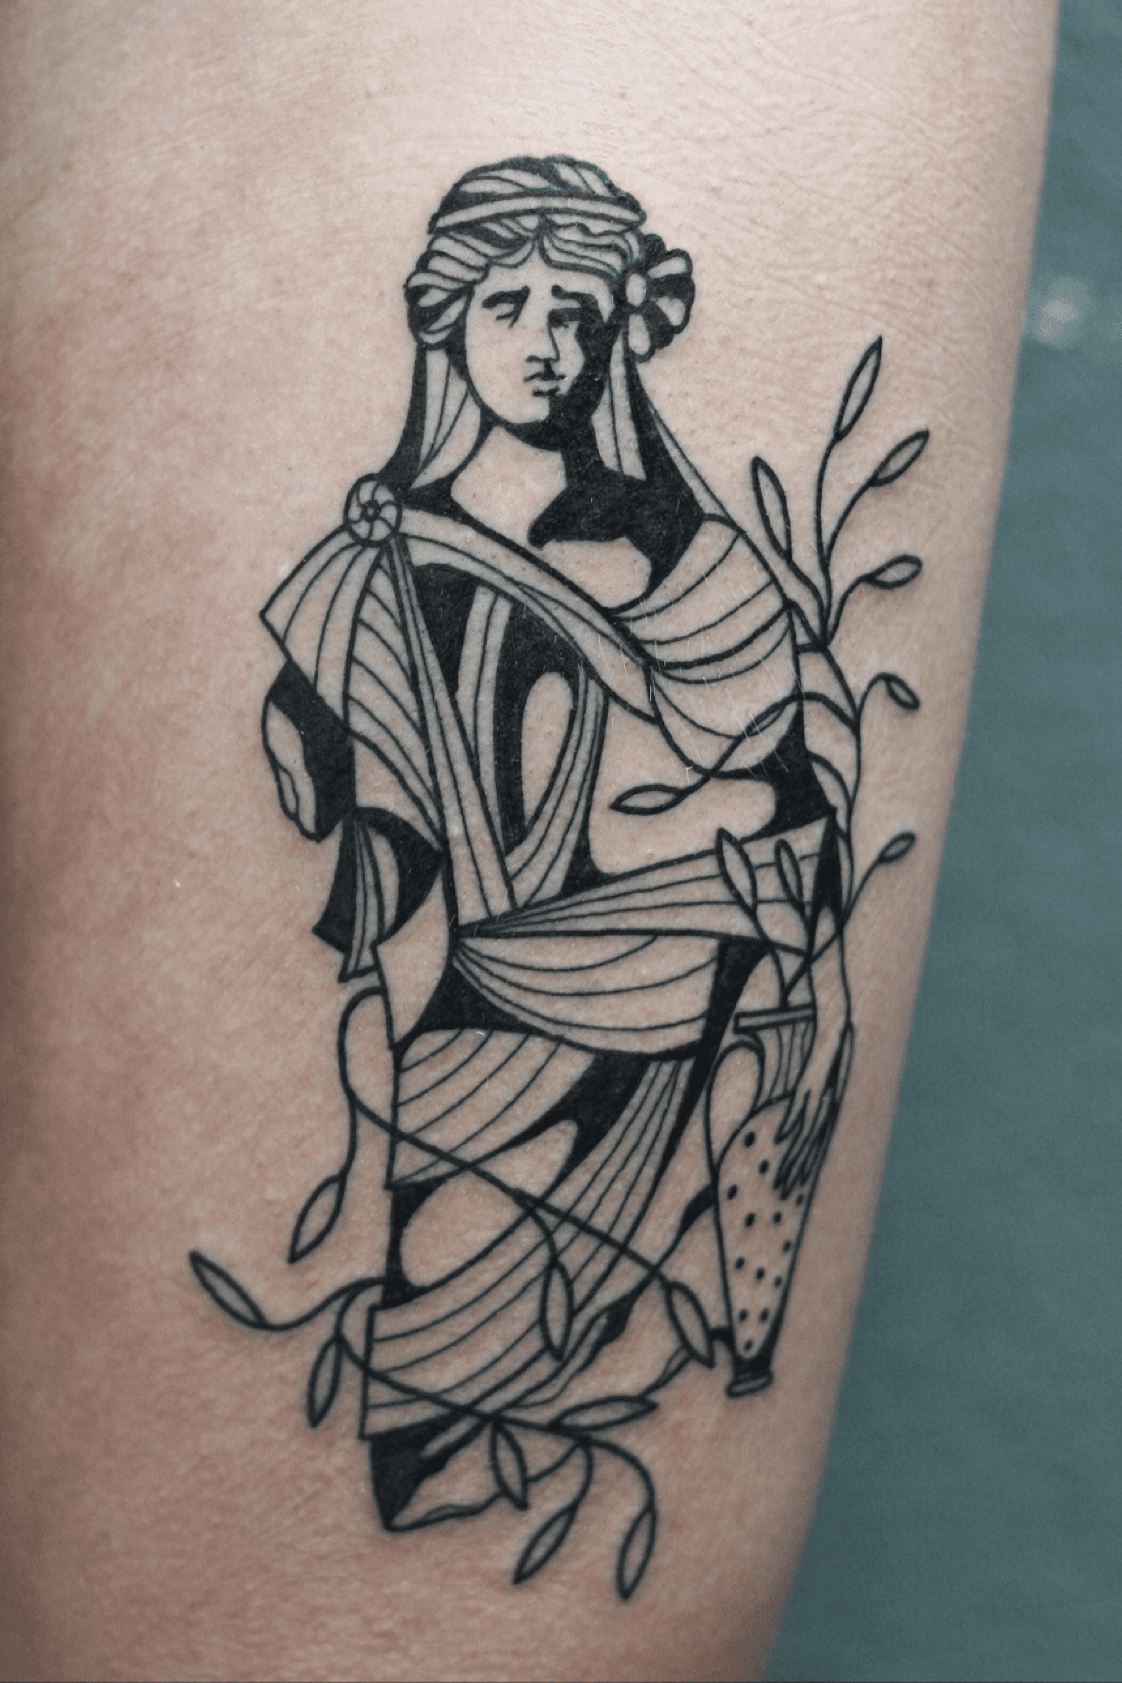 Realistic roman sculpture tattoo on the bicep inspired